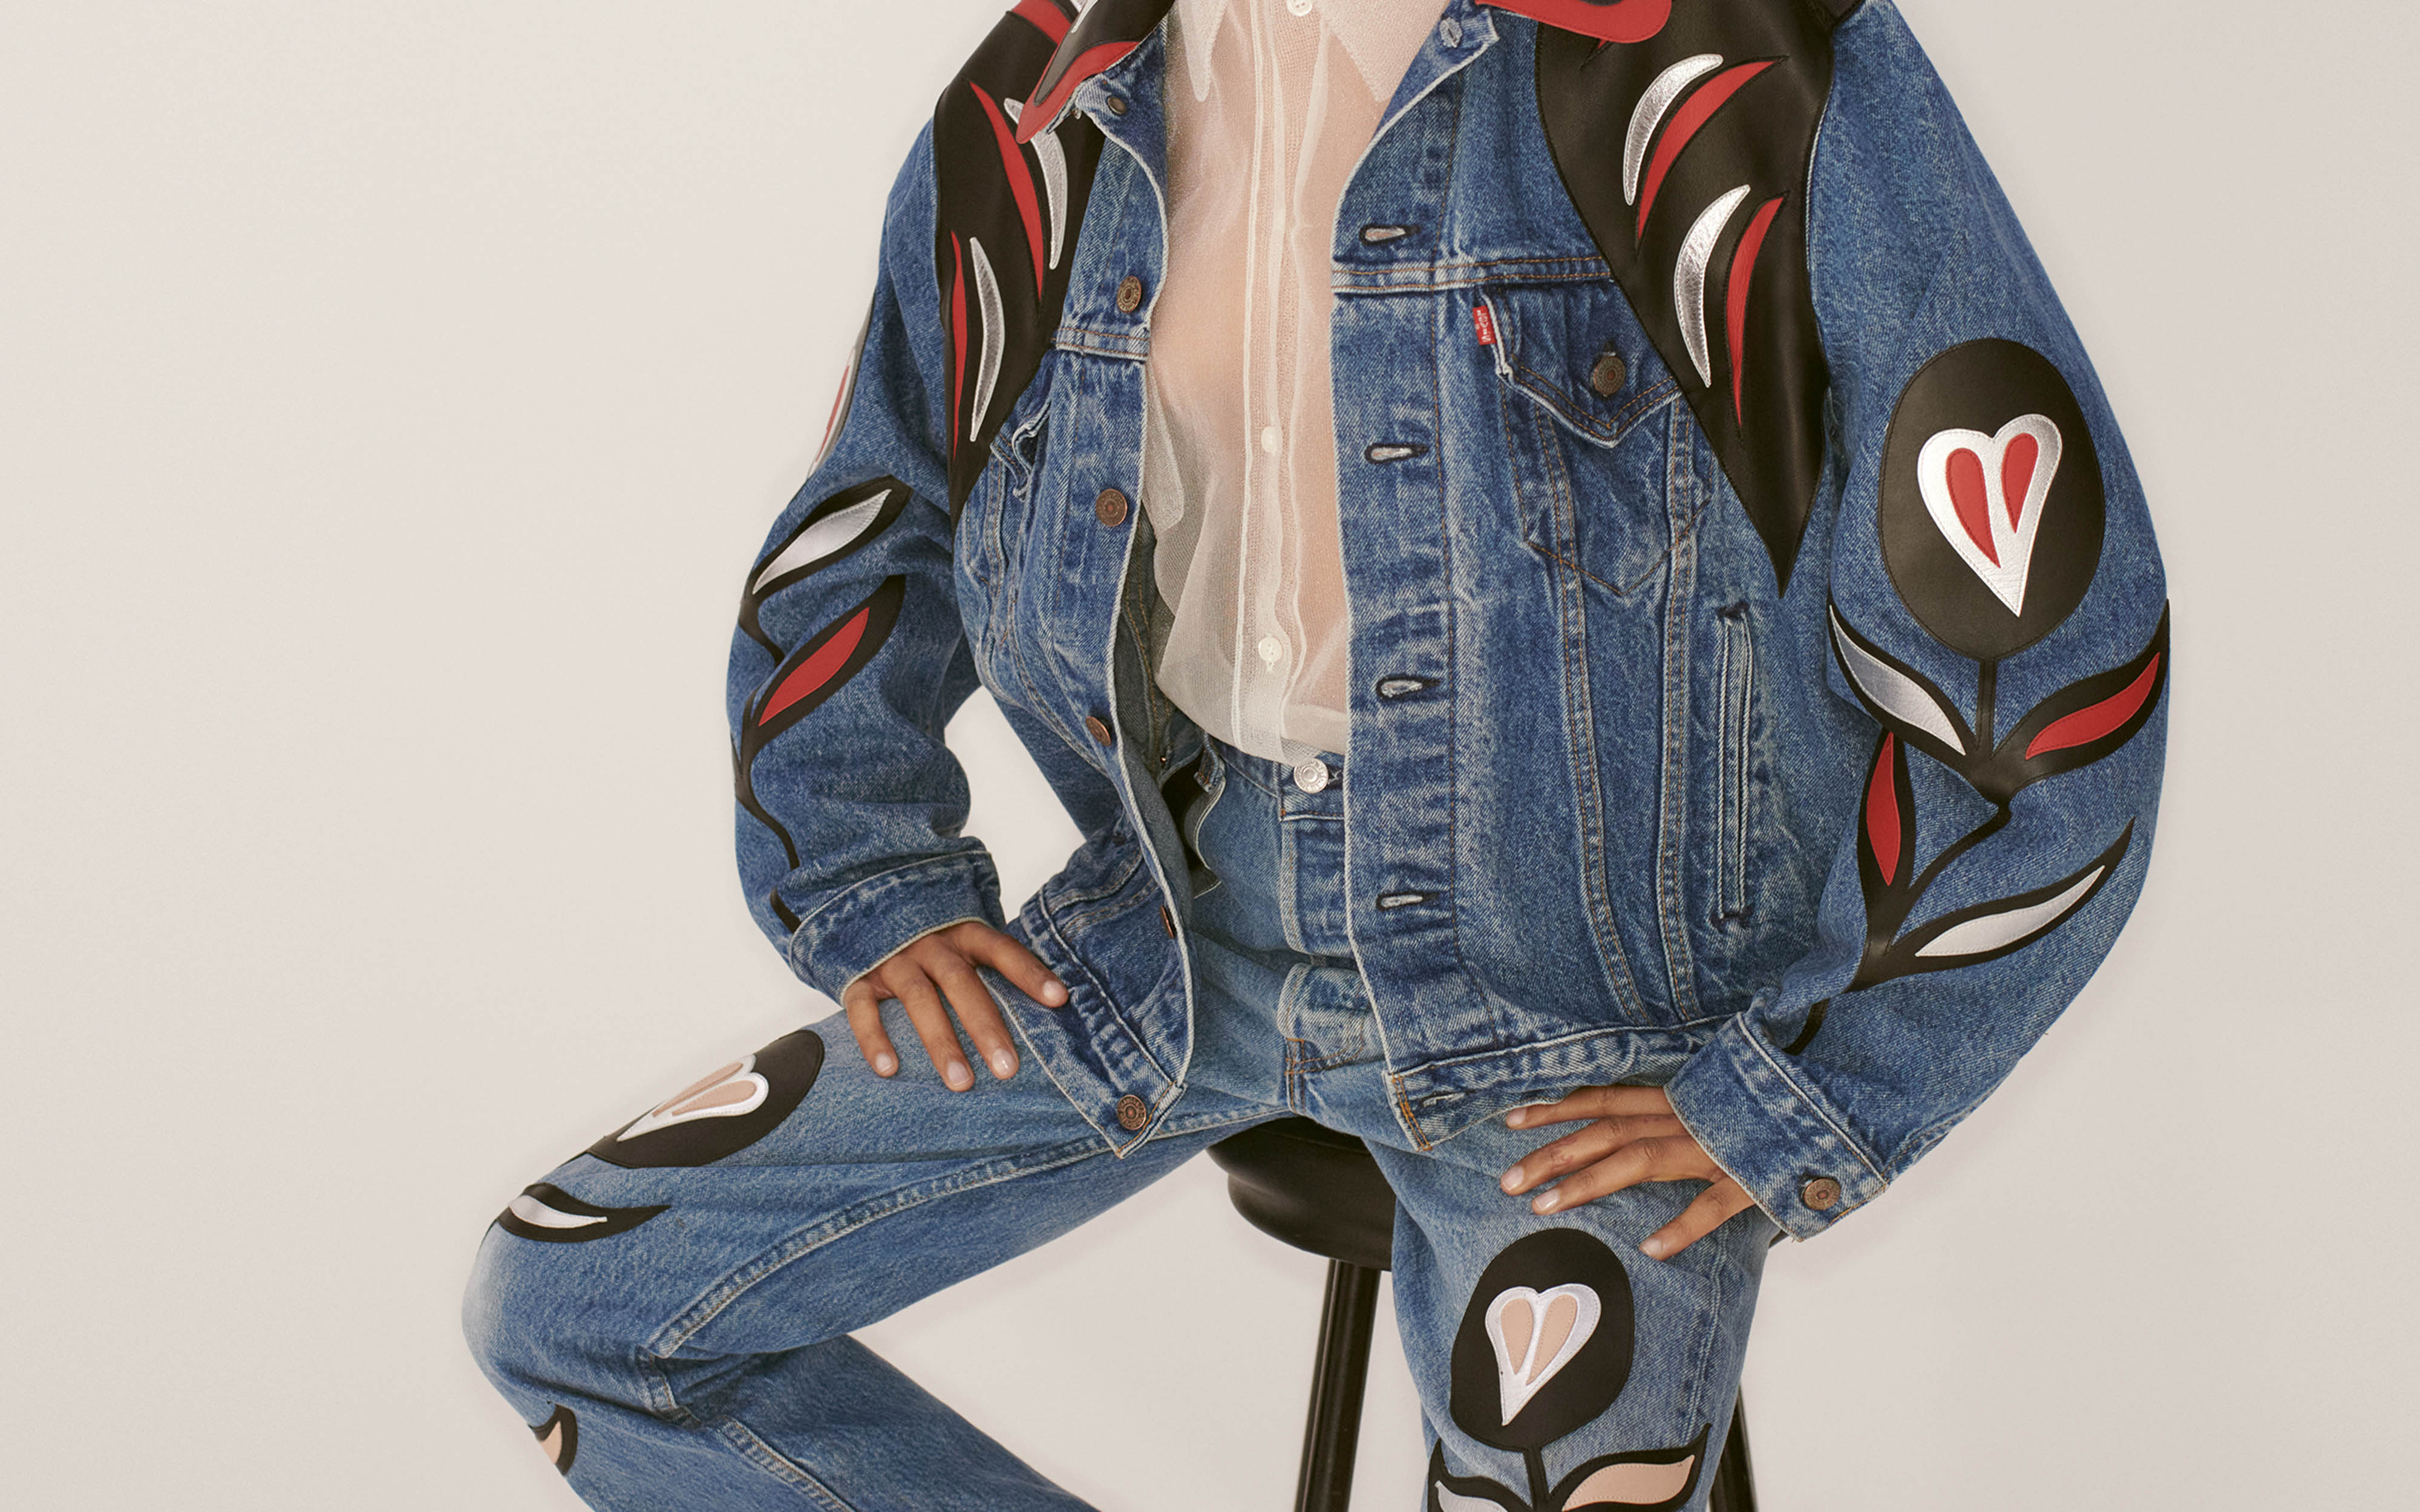 Upcycled by Miu Miu Reworks Pre-Loved Levis + More Fashion News